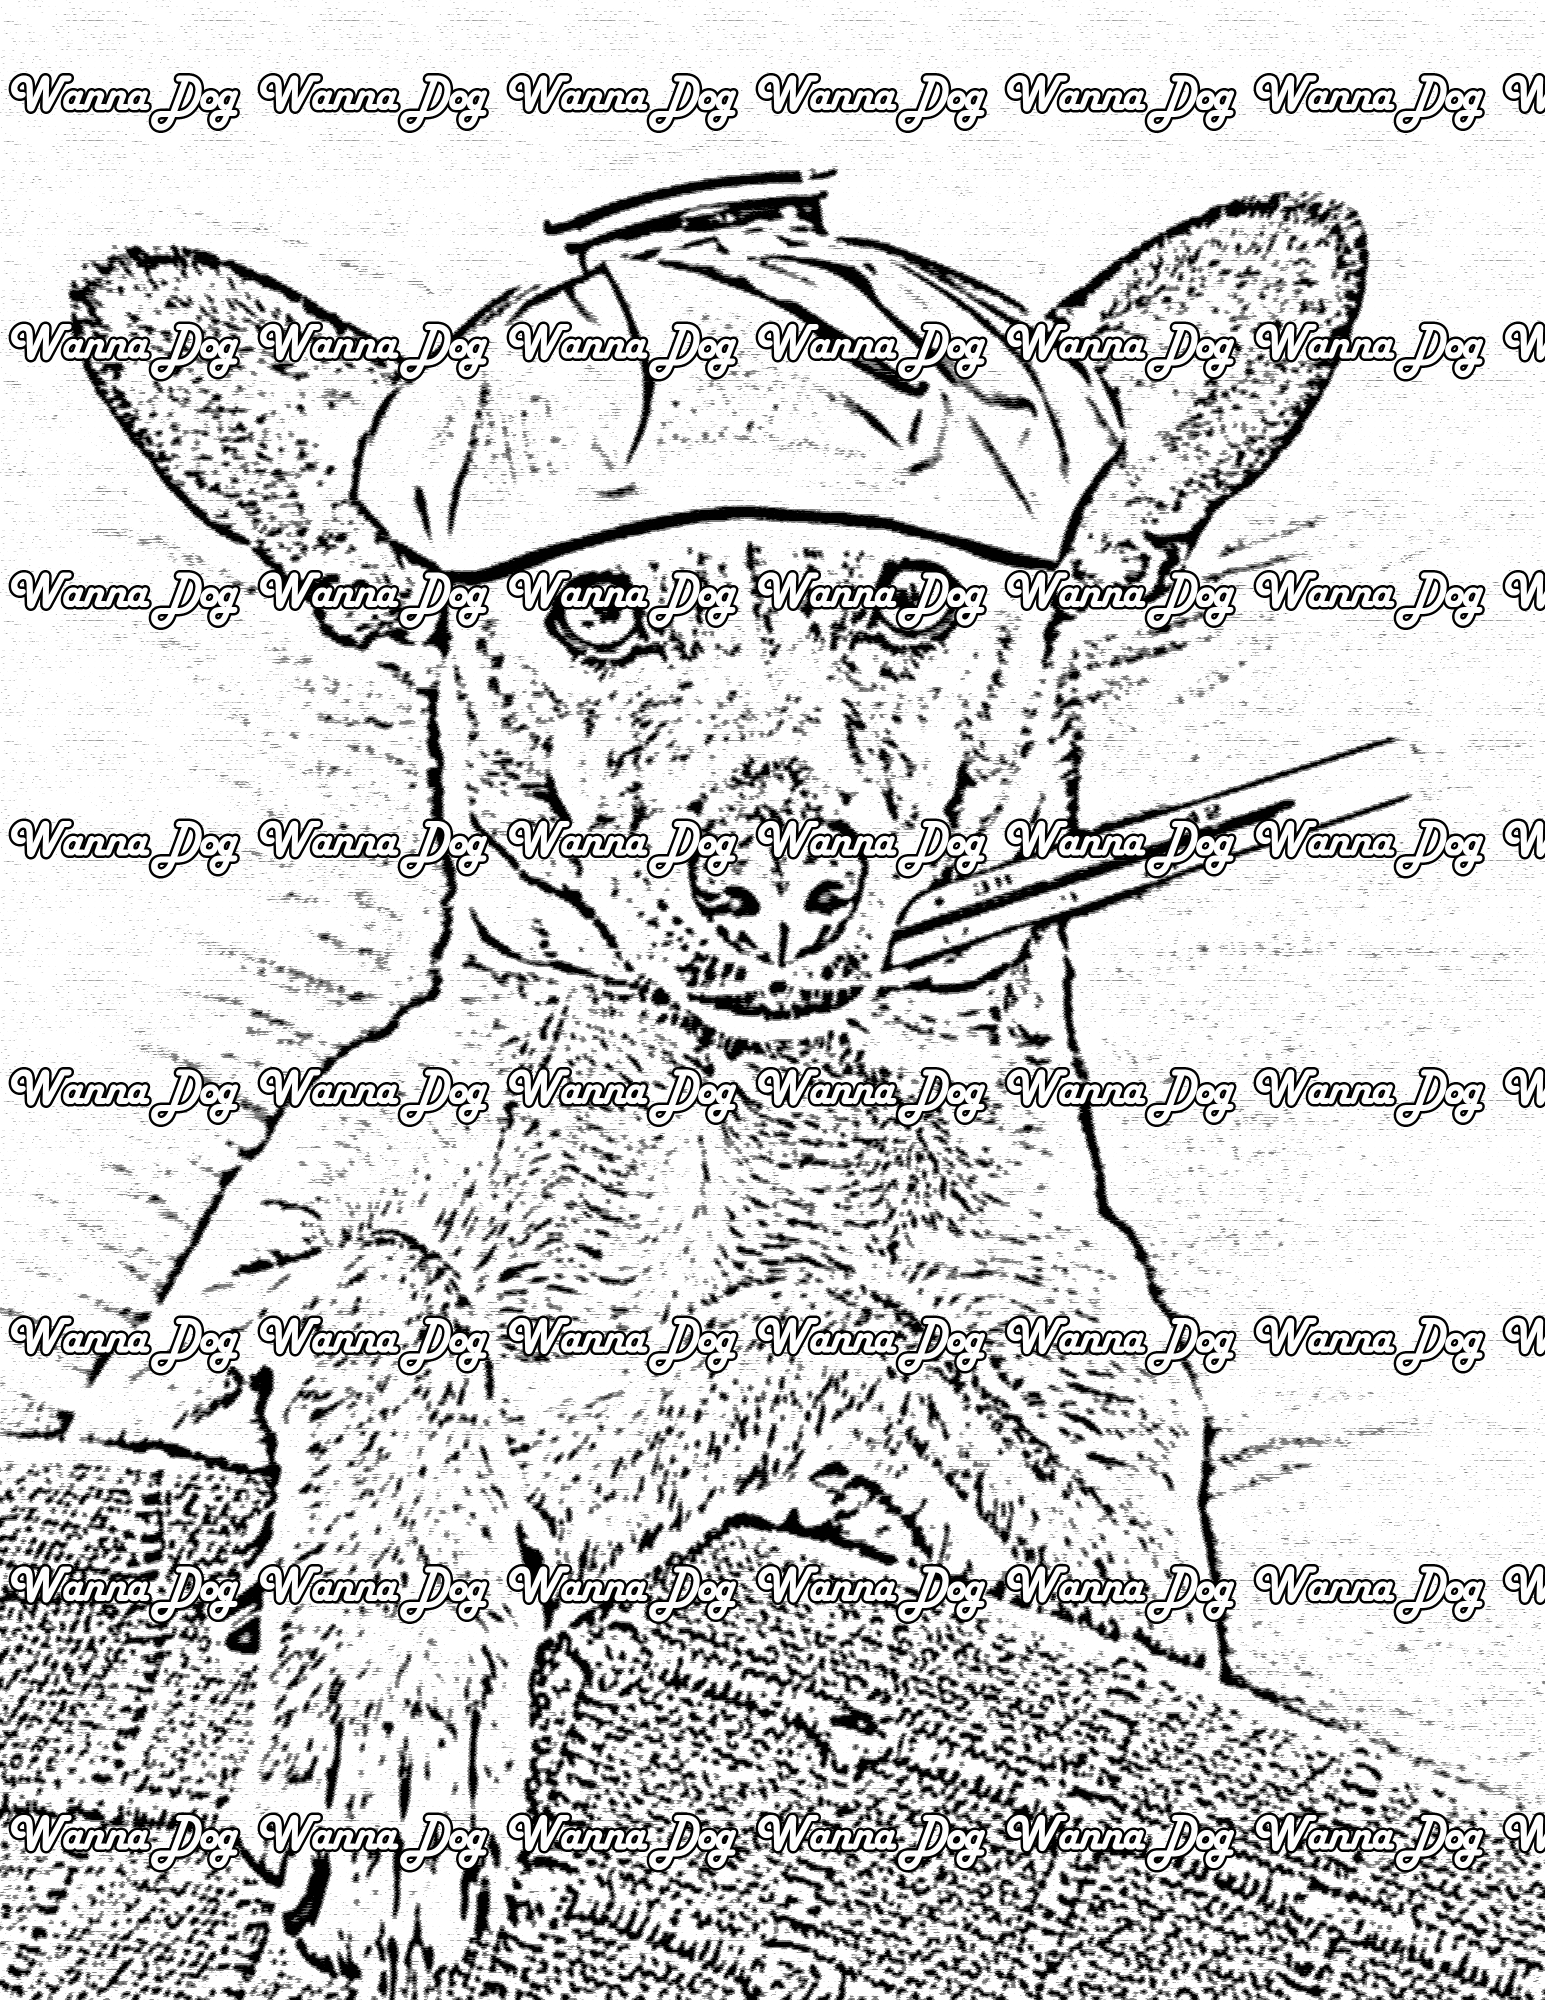 Chihuahua Coloring Page of a Chihuahua taking a sick day from work